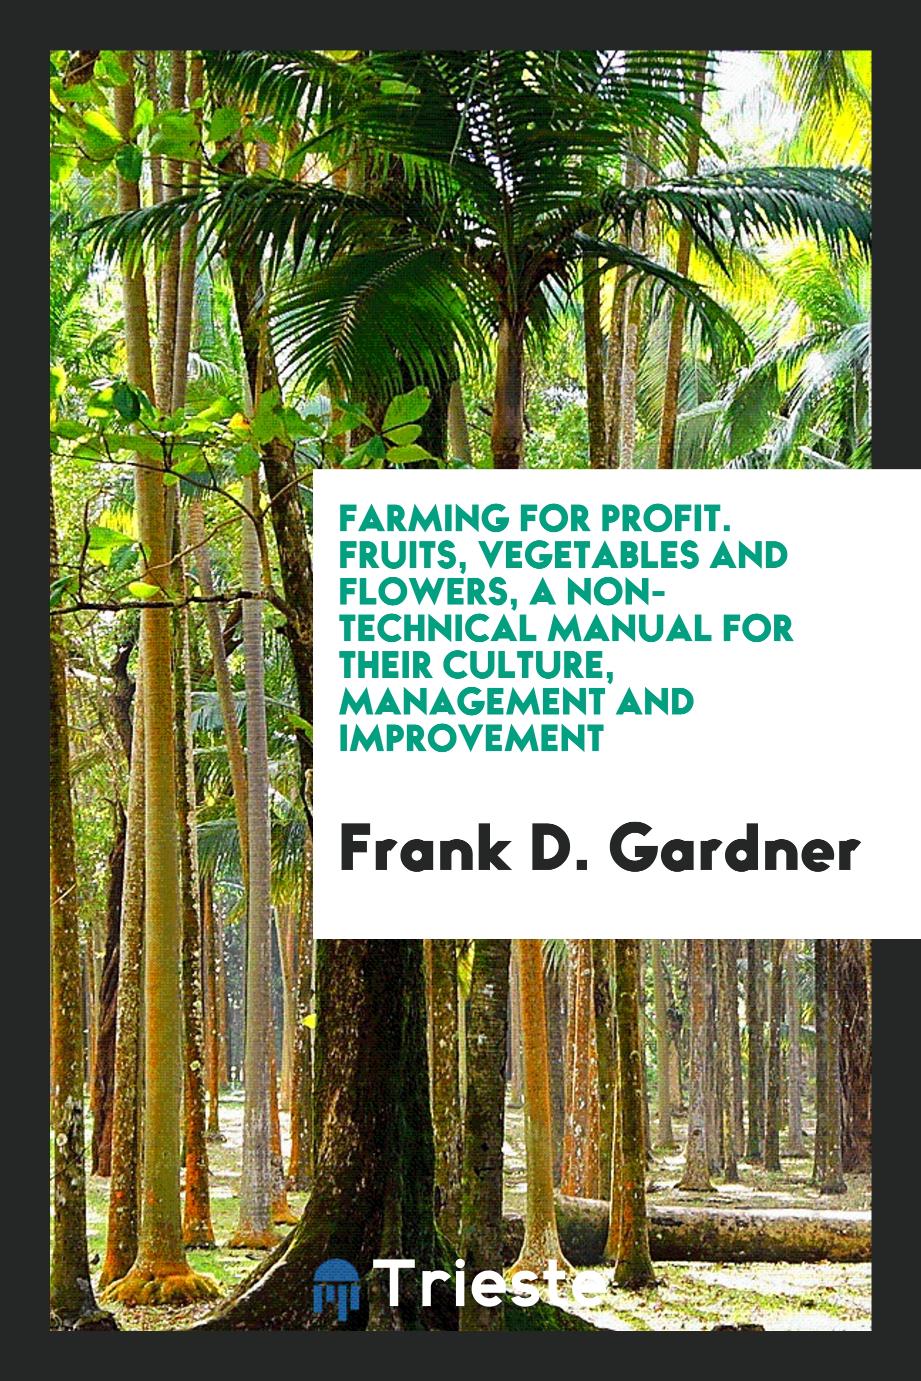 Farming for Profit. Fruits, Vegetables and Flowers, a Non-Technical Manual for Their Culture, Management and Improvement